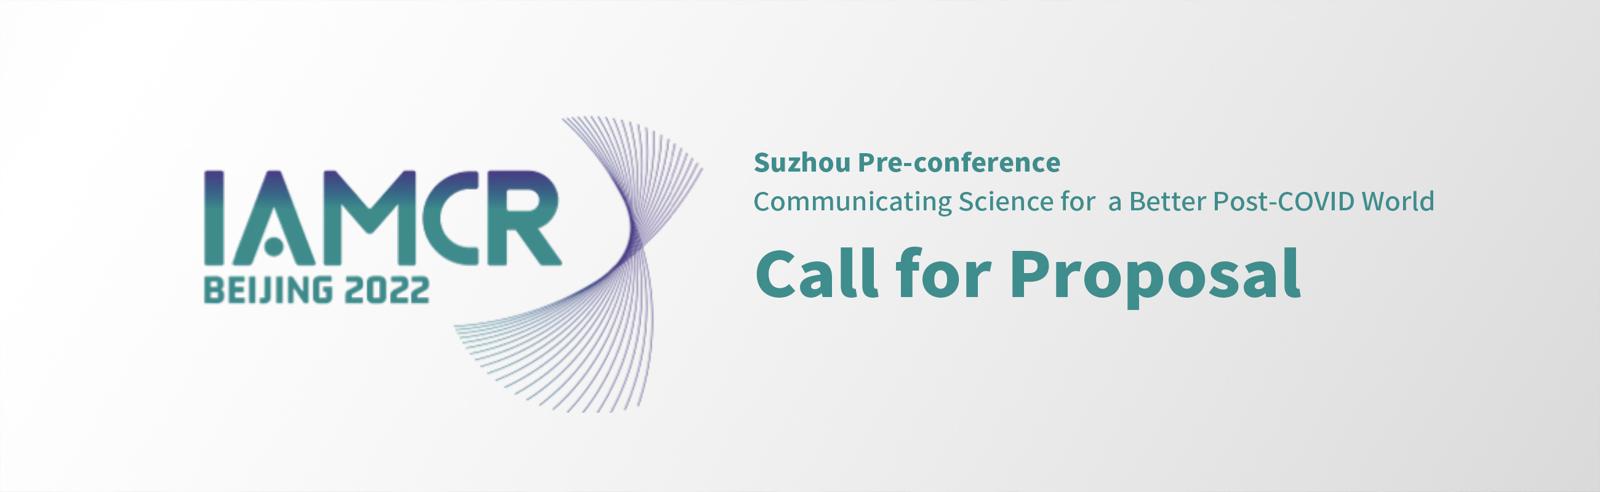 IAMCR Beijing 2022 Suzhou Pre-conference Call for Proposal